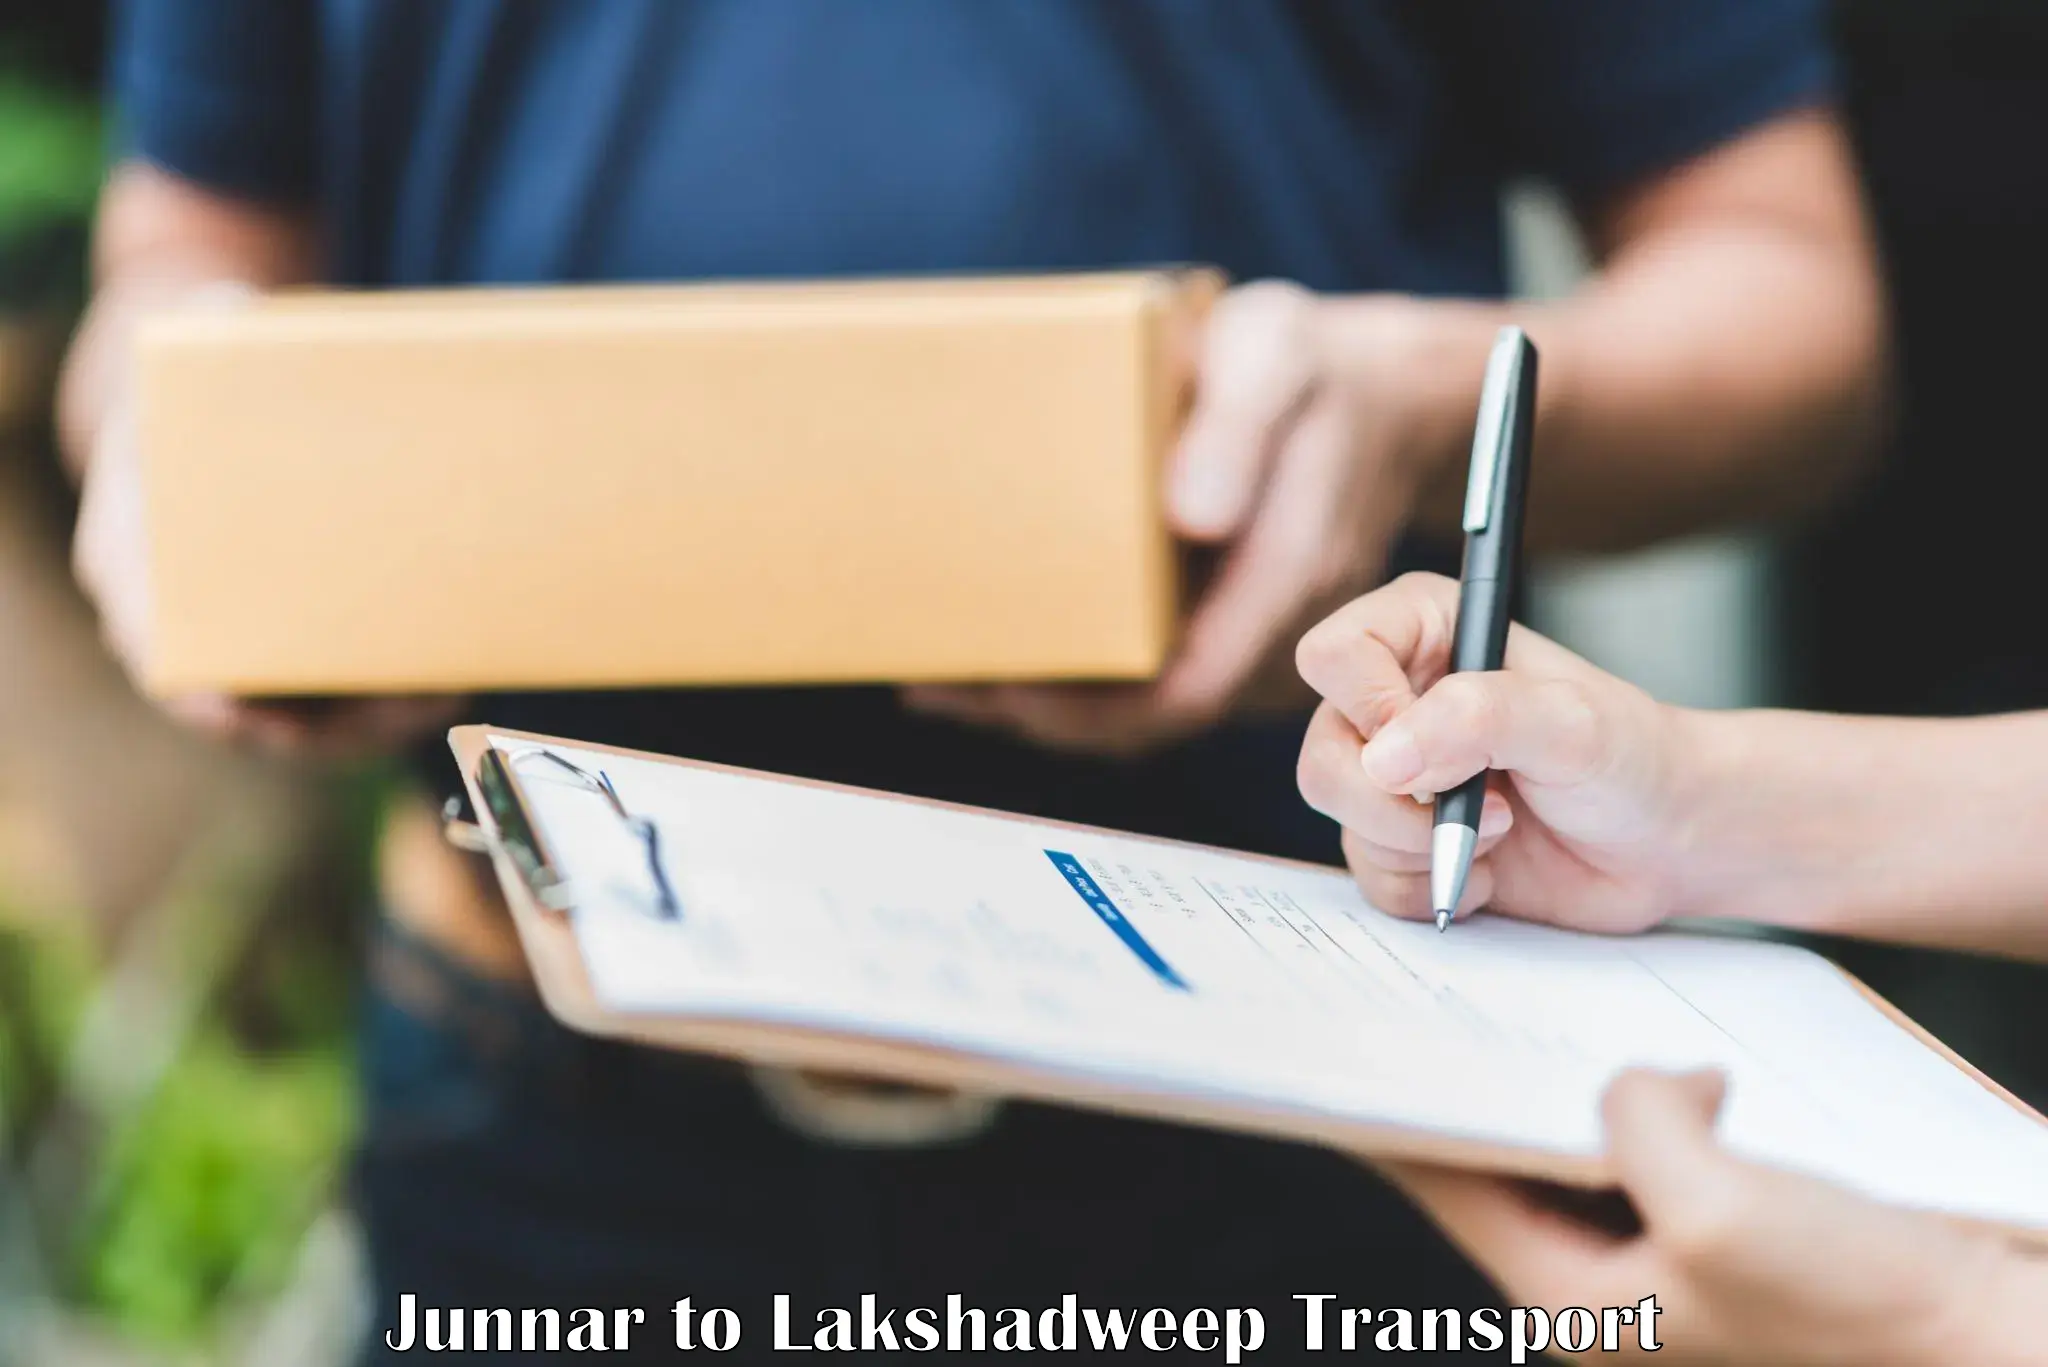 Container transport service Junnar to Lakshadweep